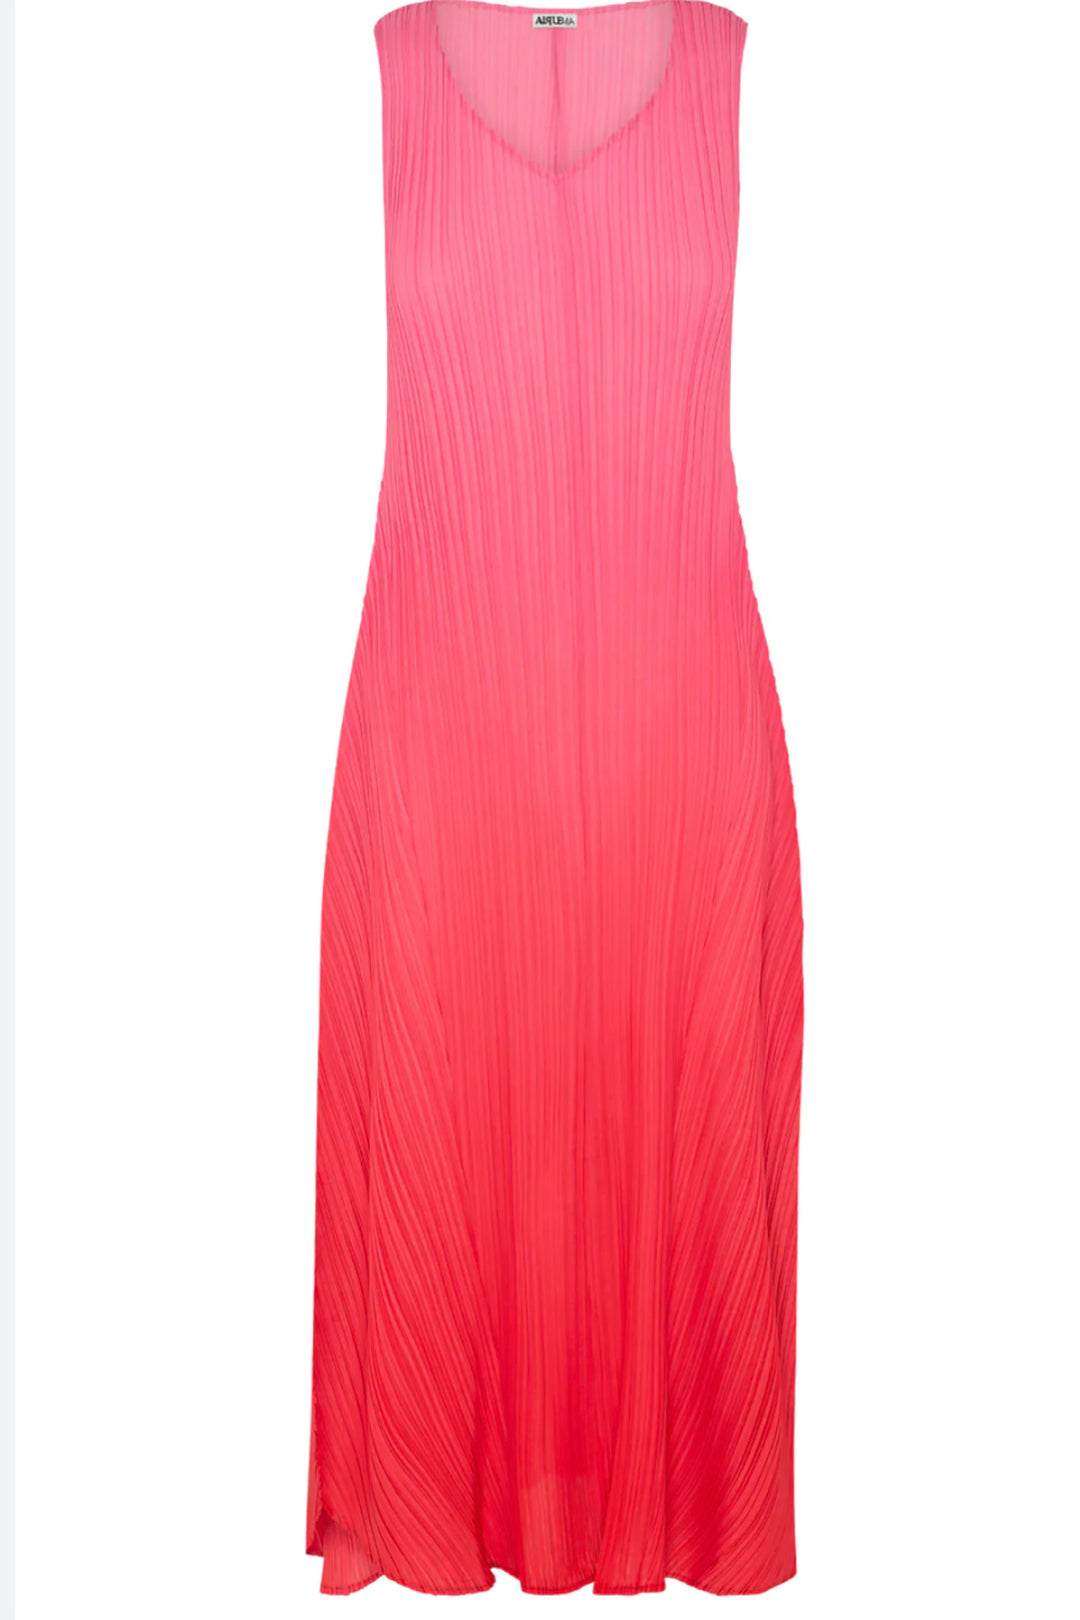 Alquema dress rose hip to ombre, Sold and shipped from Pizazz Boutique Nelson Bay women's dresses online Australia